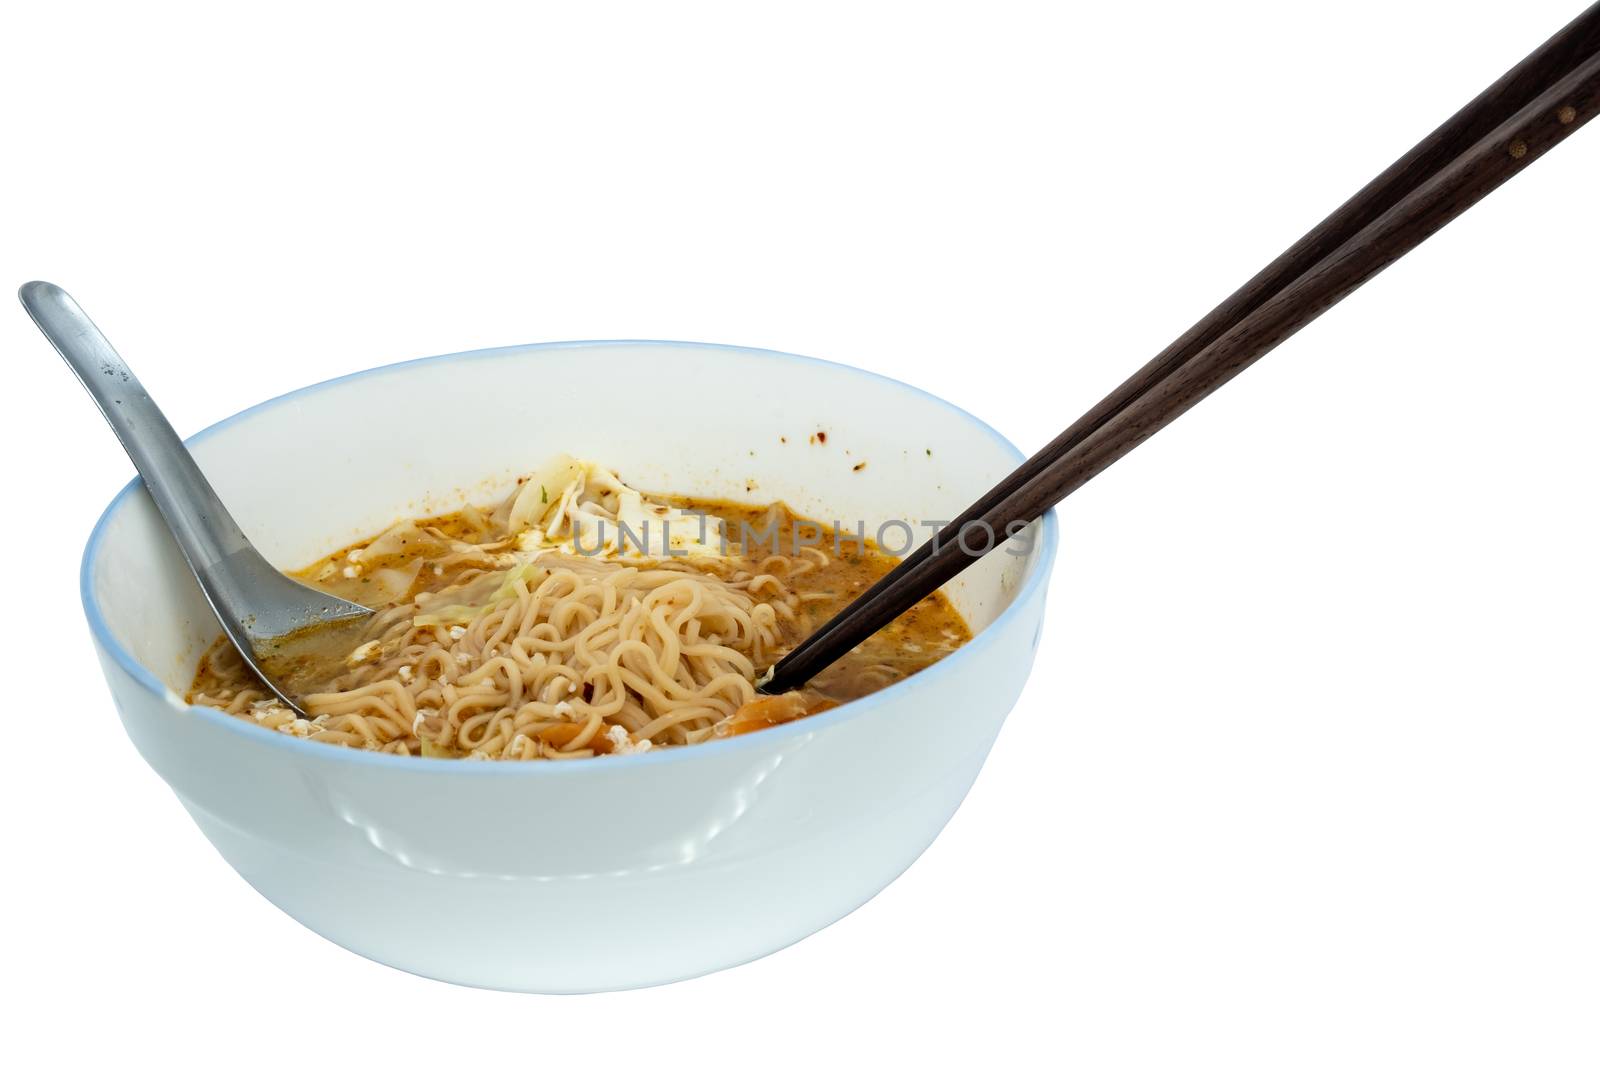 Instant noodle with spoon and chopsticks in a white ceramic bowl isolated on white. by peerapixs